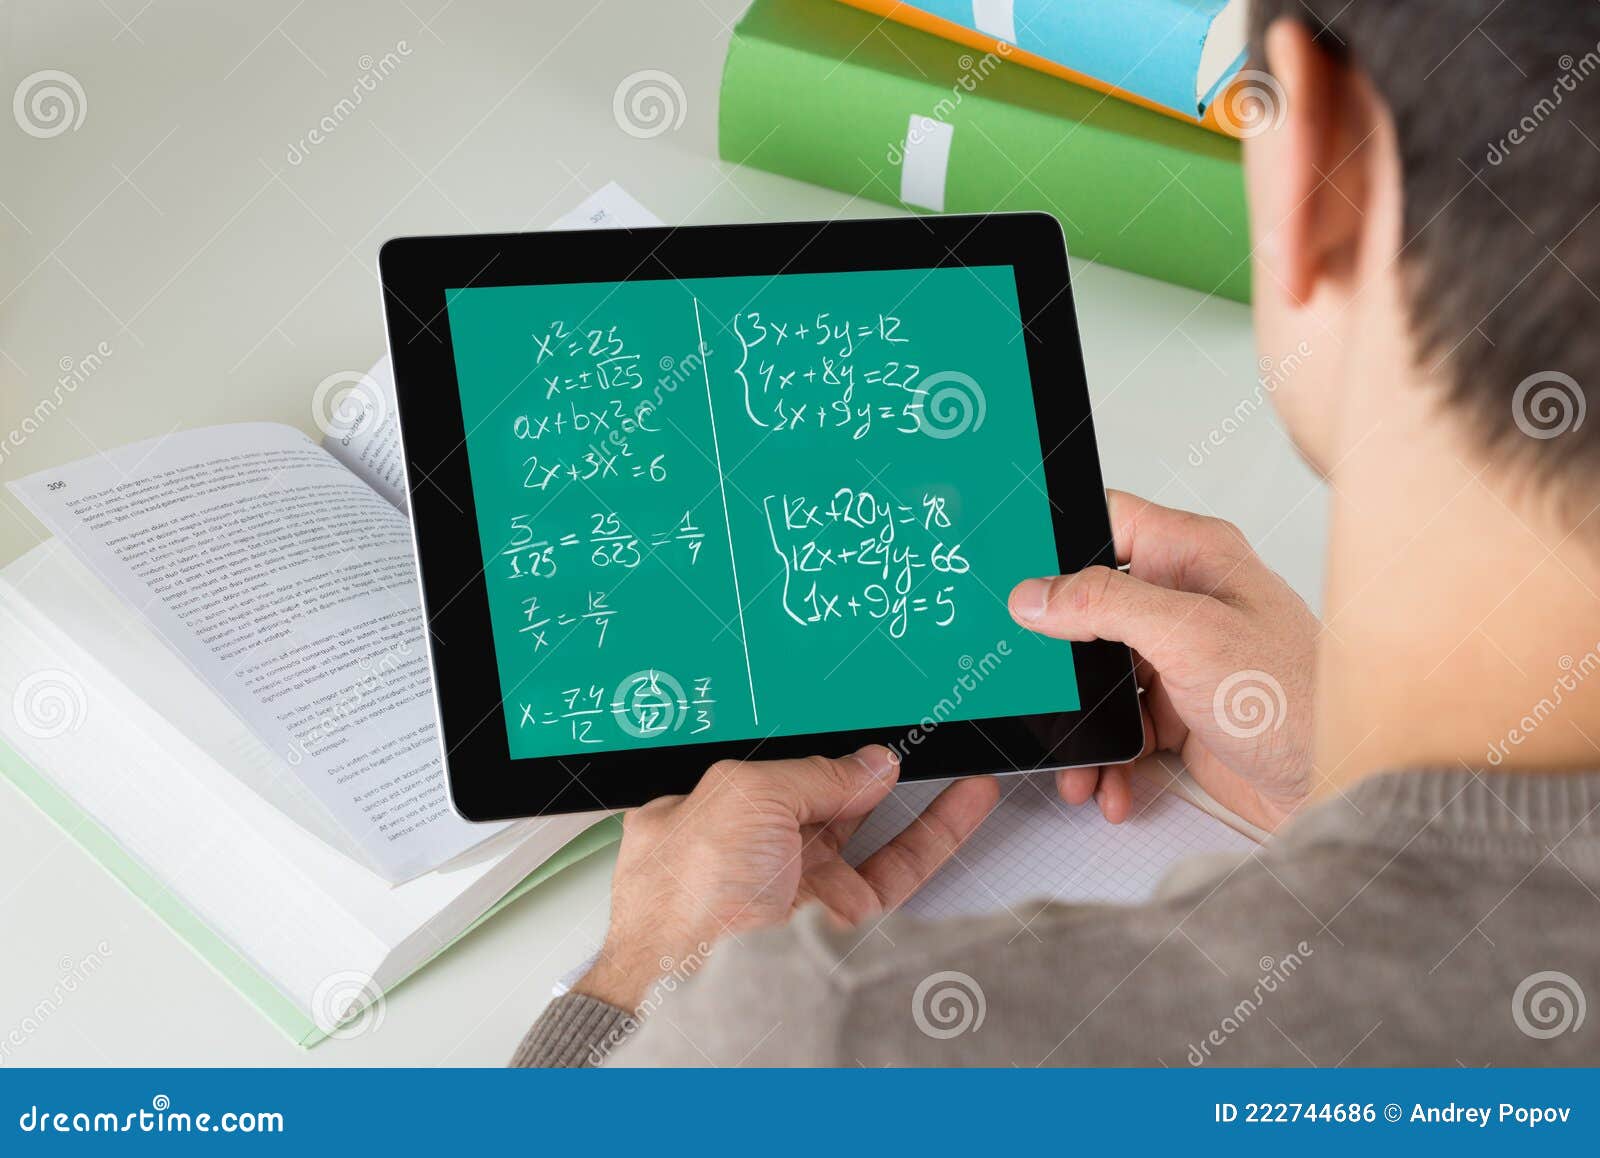 student learning mathematical equations on digital tablet